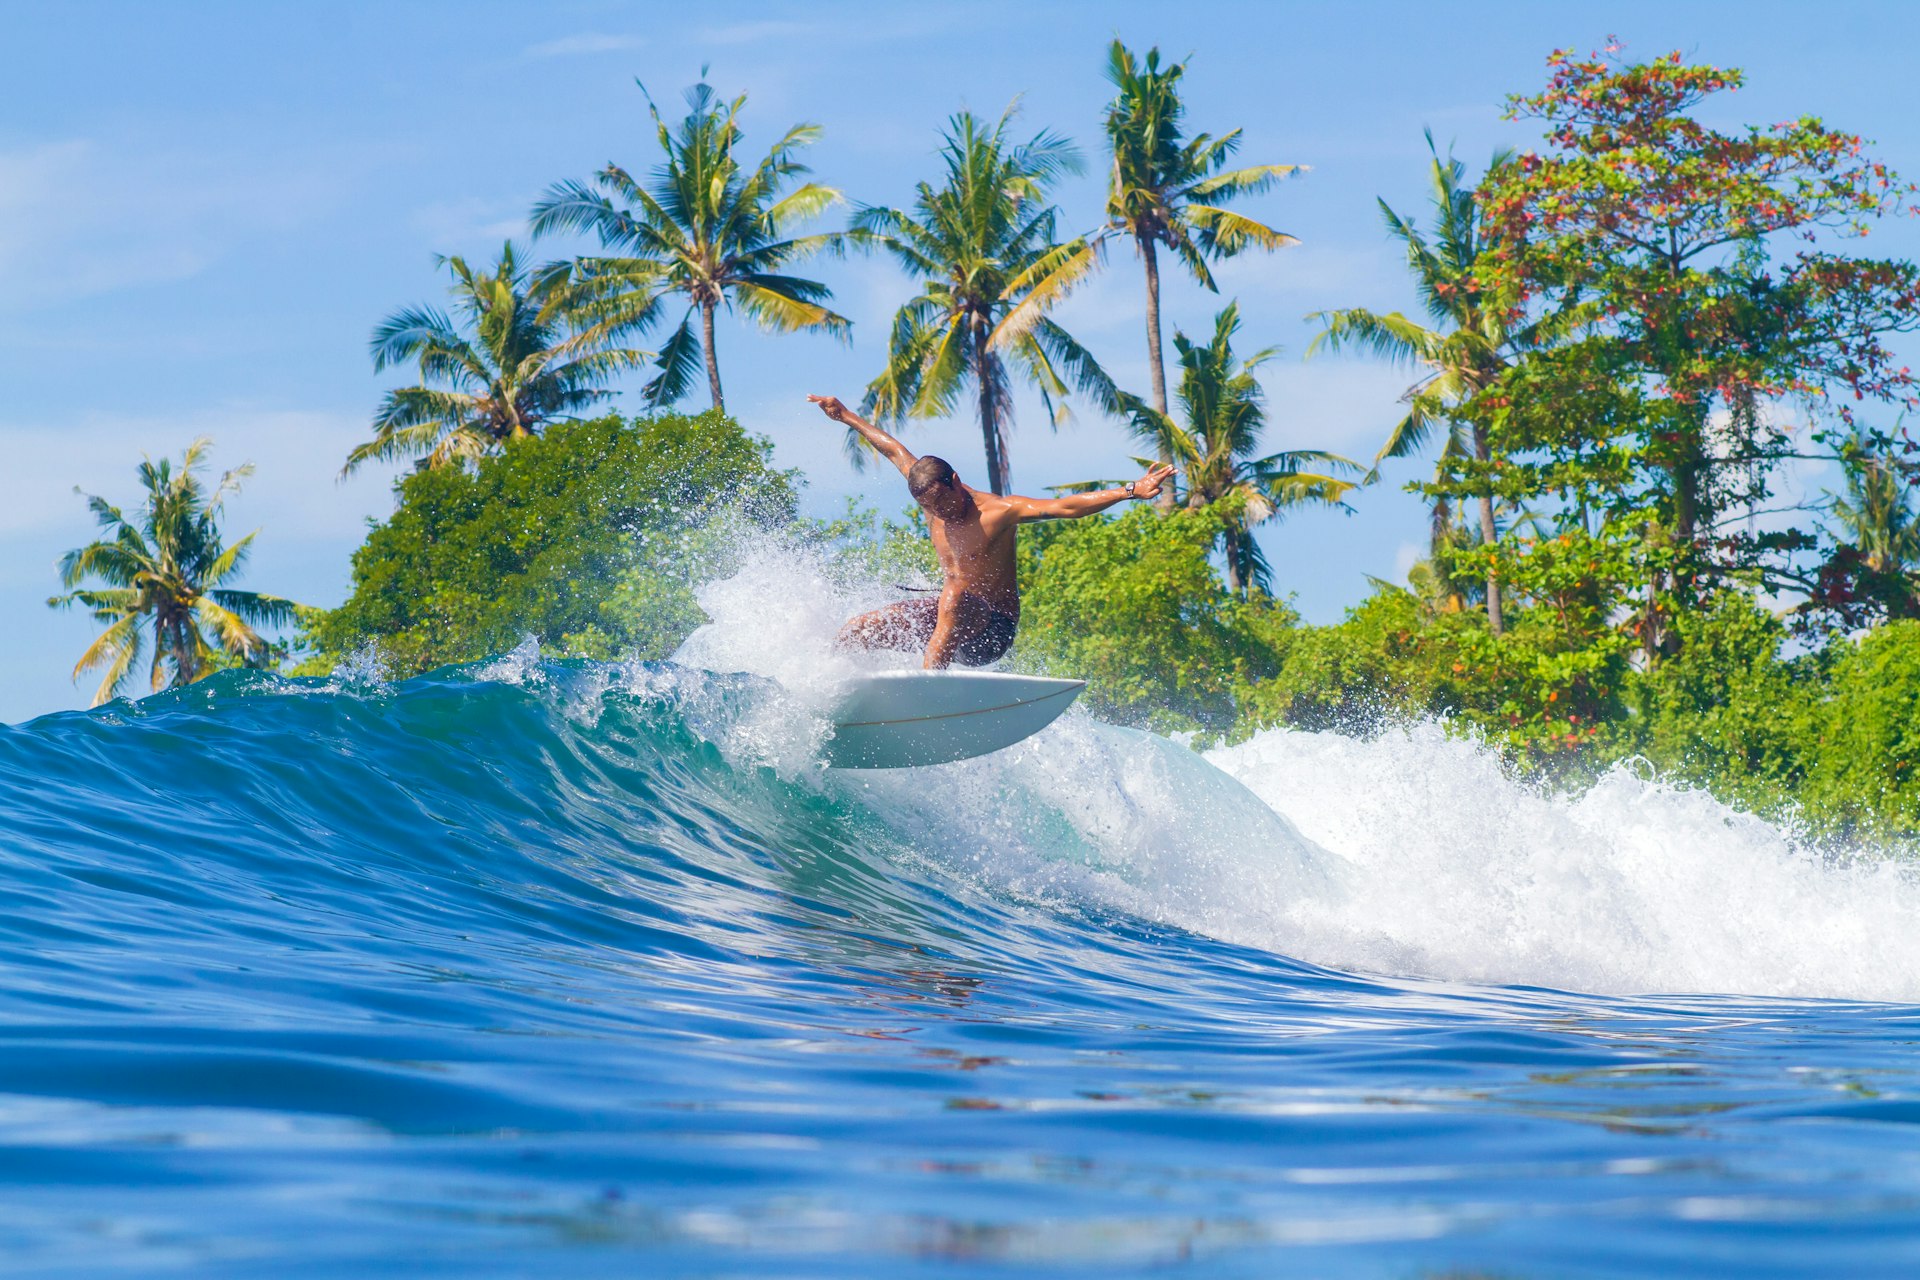 A shirtless white man rides a wave on Bali, Indonesia with tropical palm trees in the background